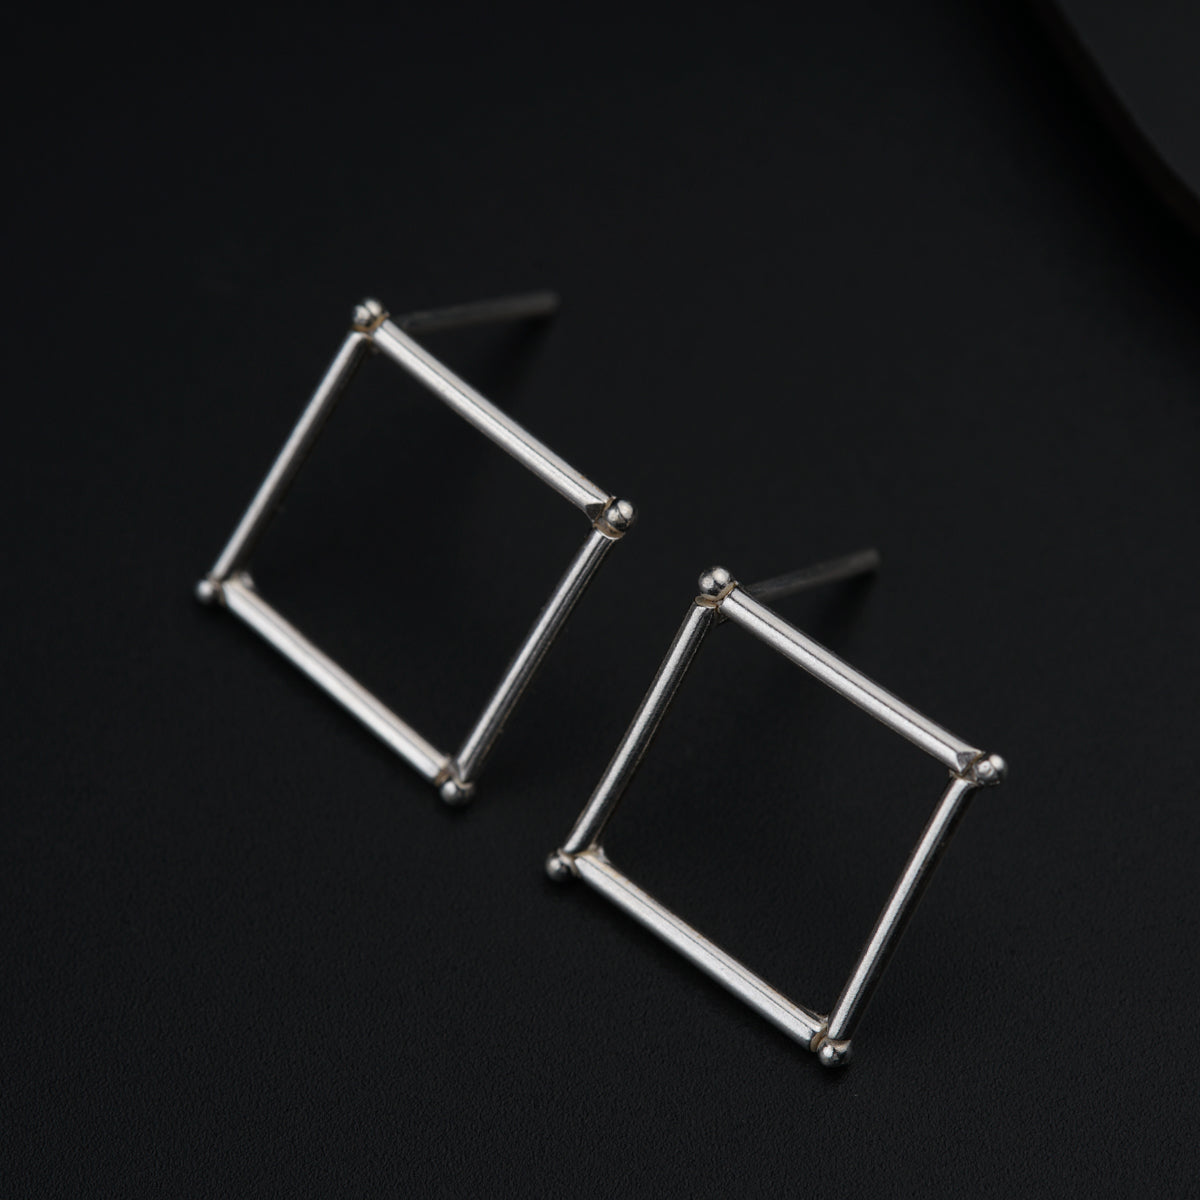 a pair of square earrings on a black surface